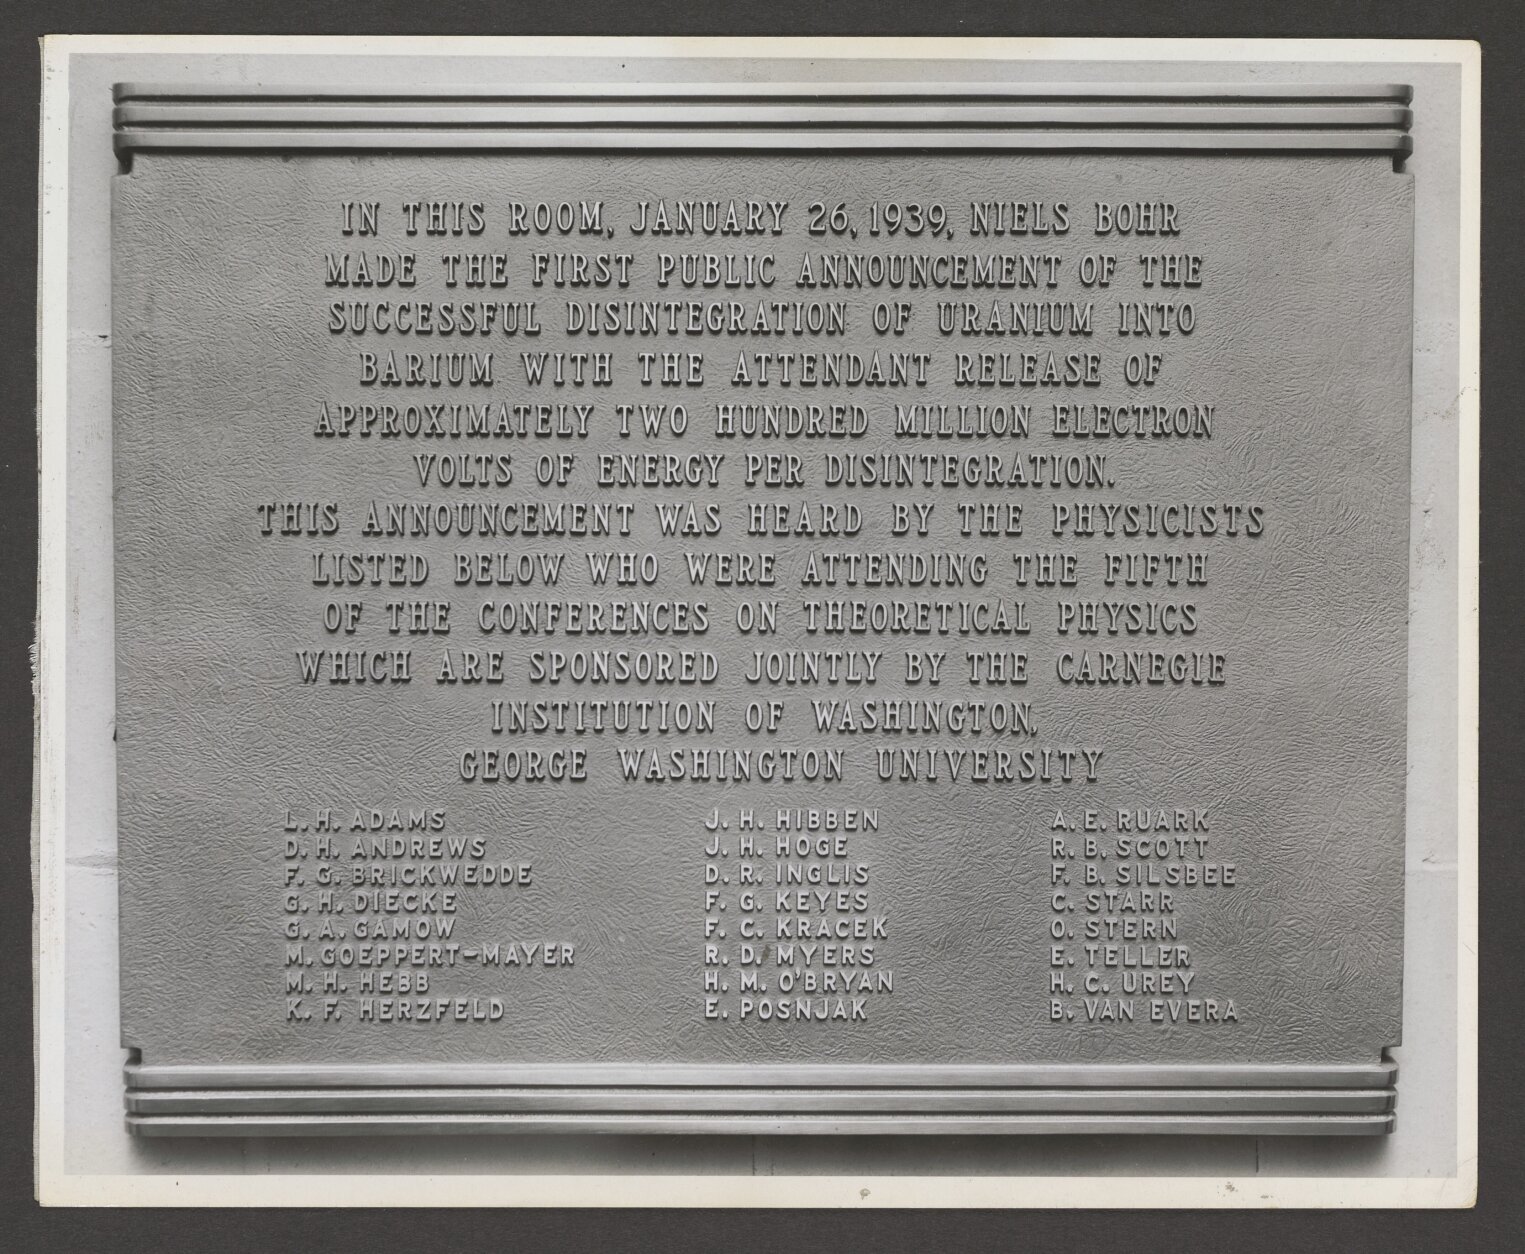 A black and white photograph of the Theoretical Physics Conference plaque, it contains the text "In this room, January 26, 1939, Niels Bohr made the first public announcement of the successful disintegration of uranium into barium with the attendant release of approximately two hundred million electron volts of energy per disintegration. (Courtesy of George Washington University)